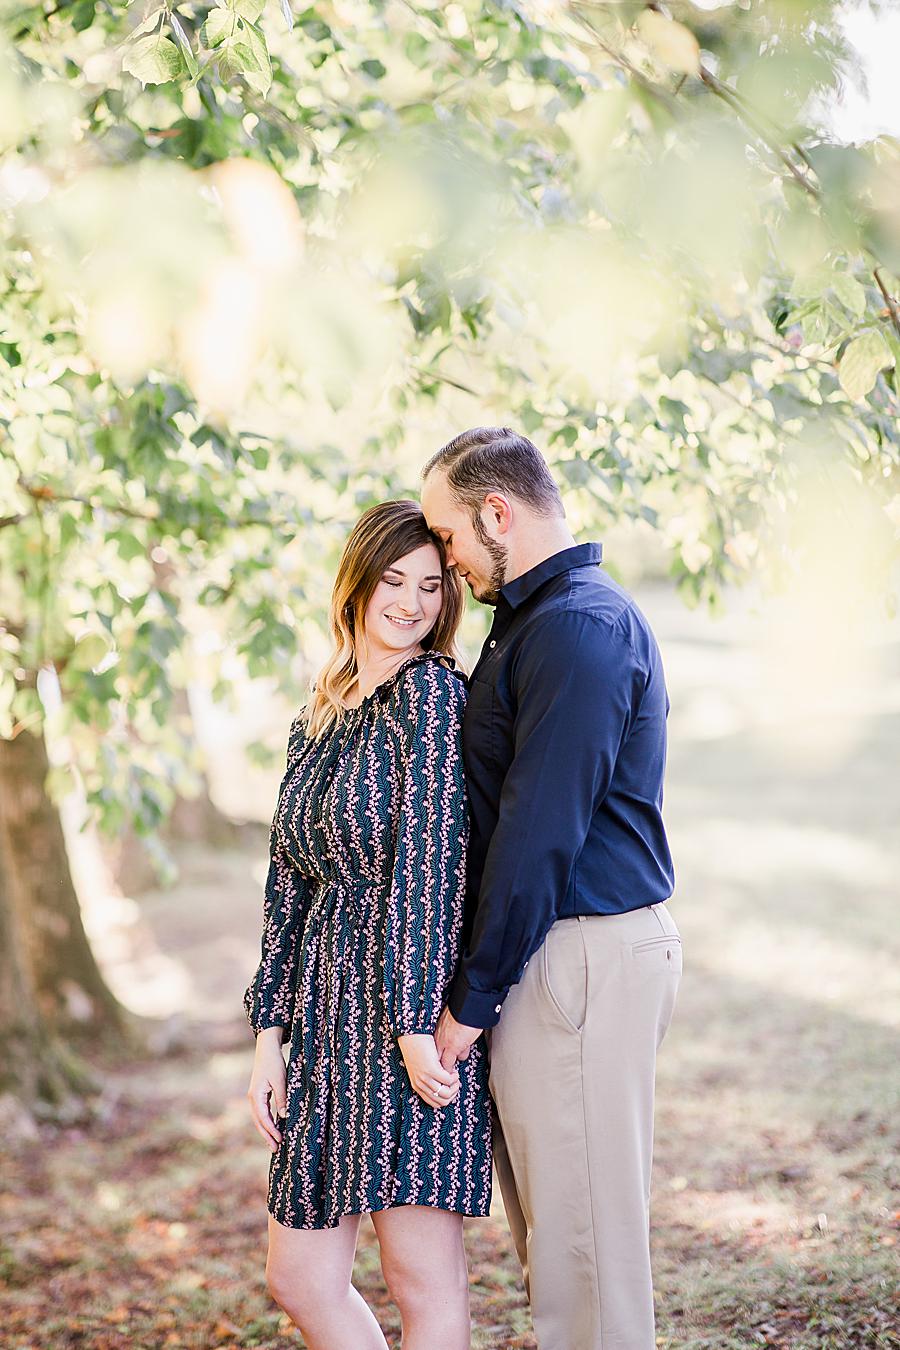 Blue button up at this Apple Barn Engagement by Knoxville Wedding Photographer, Amanda May Photos.